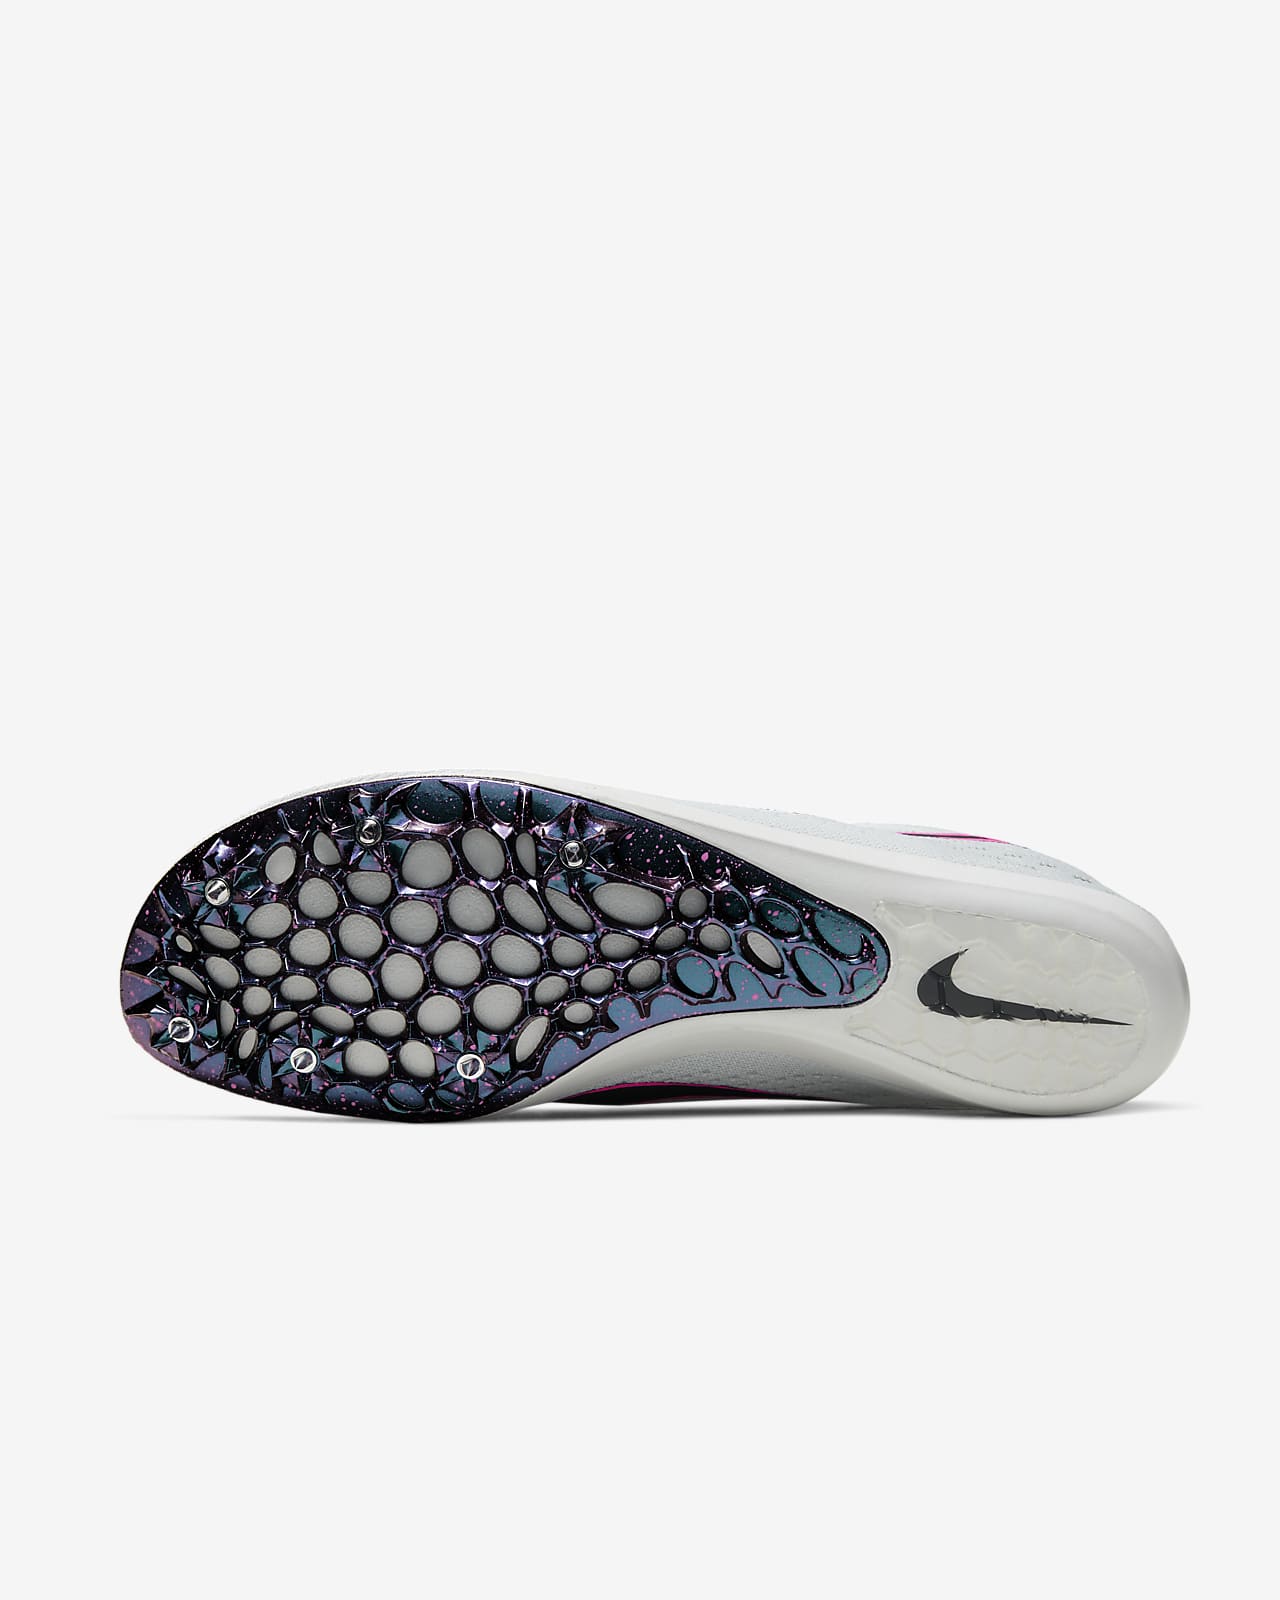 nike victory 2 track spikes